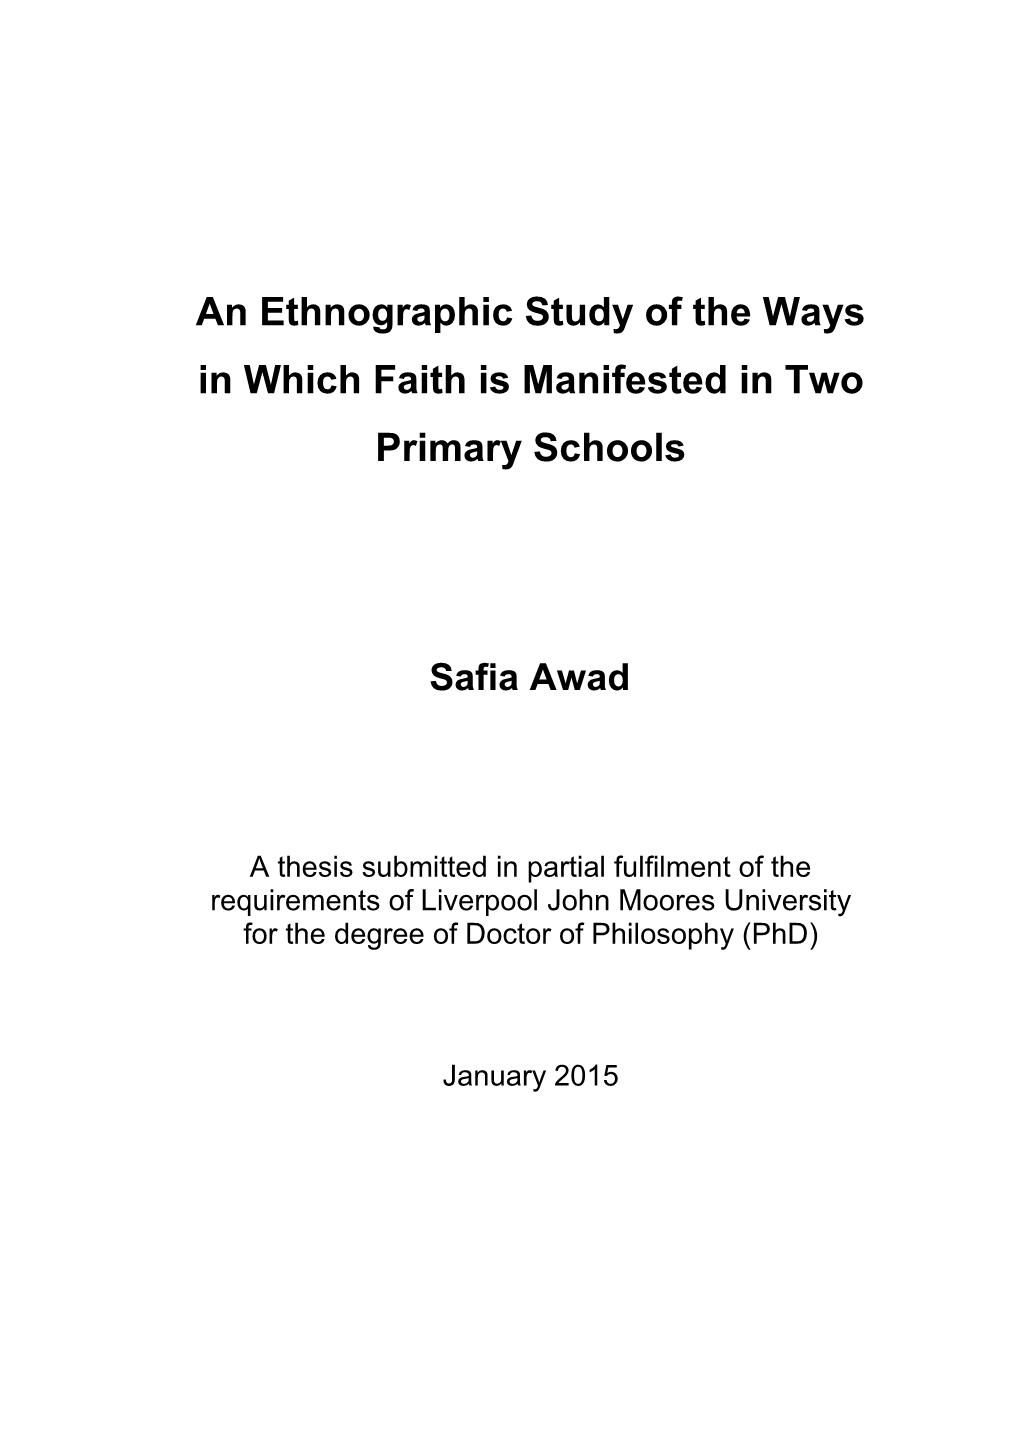 An Ethnographic Study of the Ways in Which Faith Is Manifested in Two Primary Schools